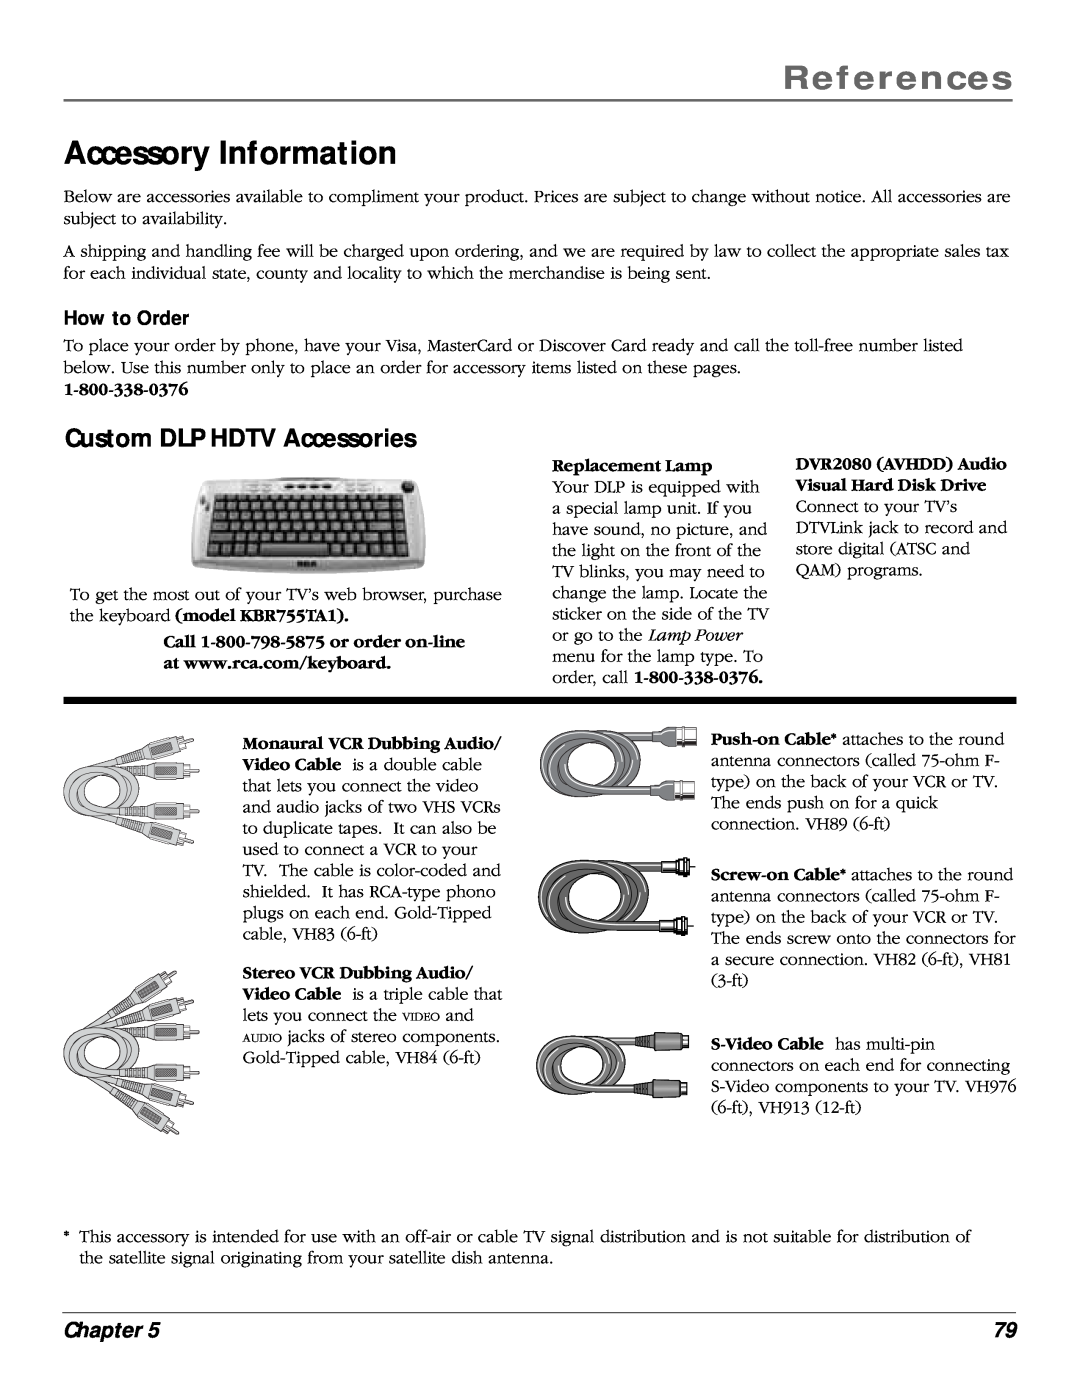 RCA scenium manual Accessory Information, Custom DLP HDTV Accessories, How to Order, Replacement Lamp, References, Chapter 